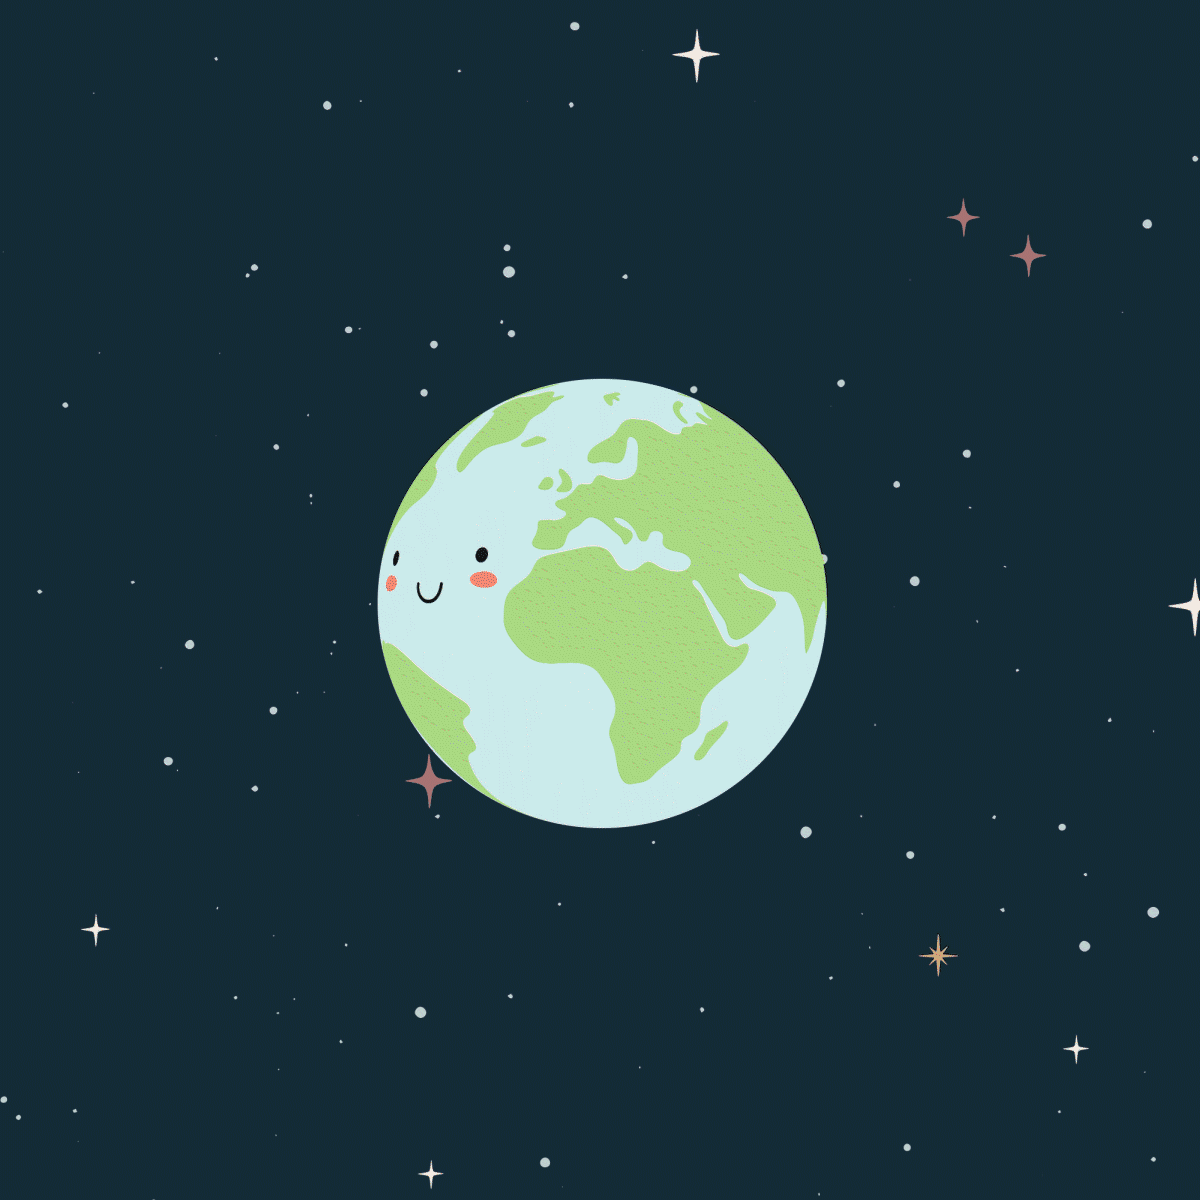 A GIF of a spinning earth in flat illustration style.